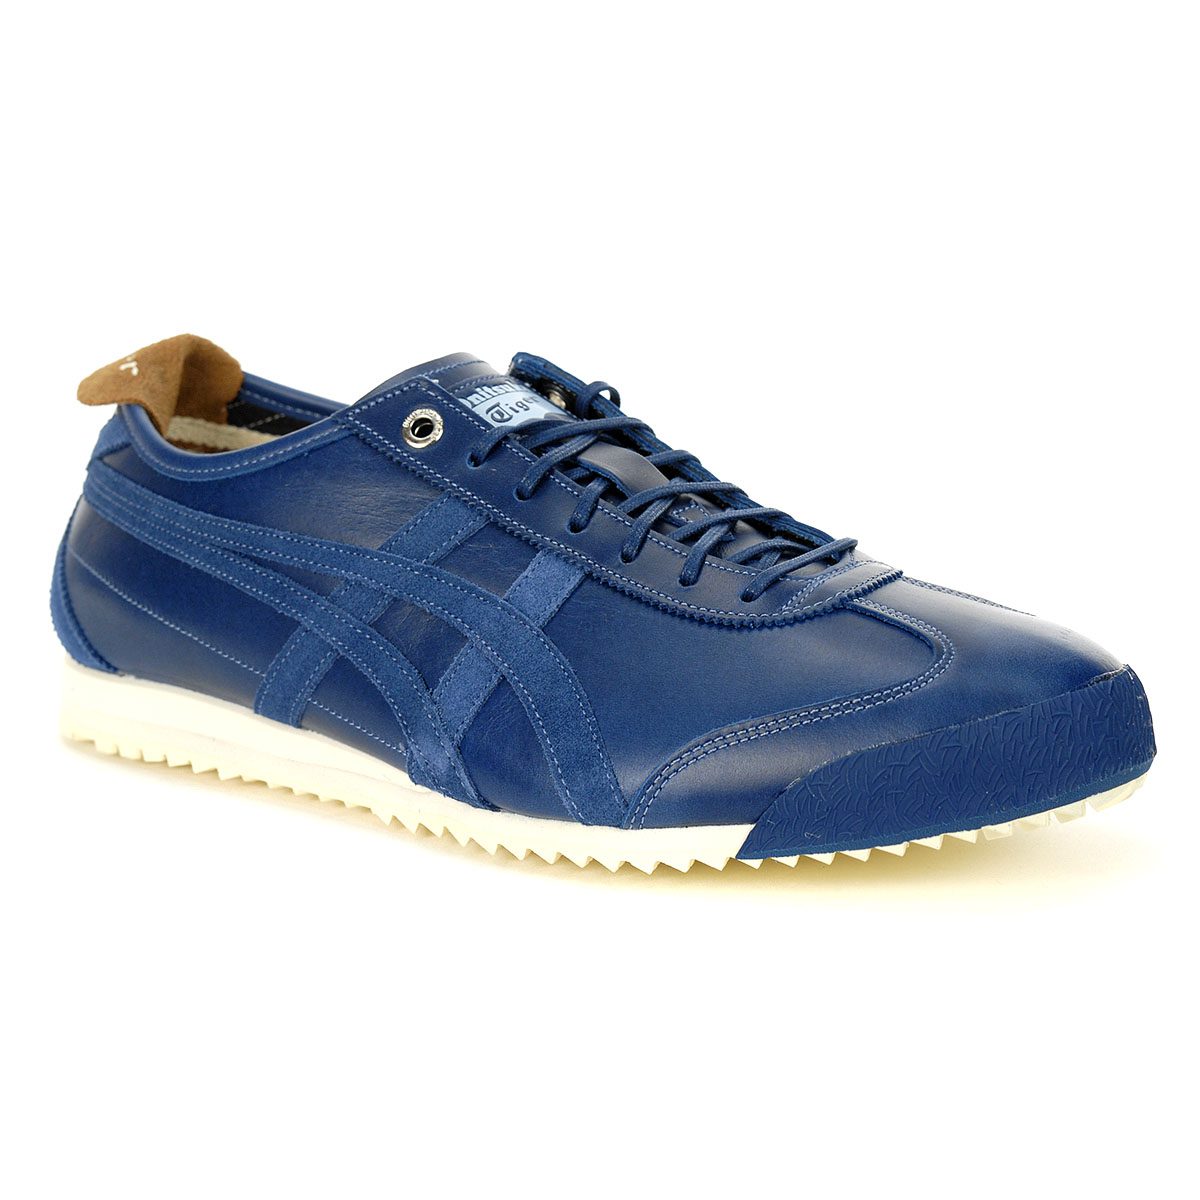 Asics Onitsuka Tiger Mexico 66 Sd Midnight Blue Sneakers 11a391 401 Wooki Com